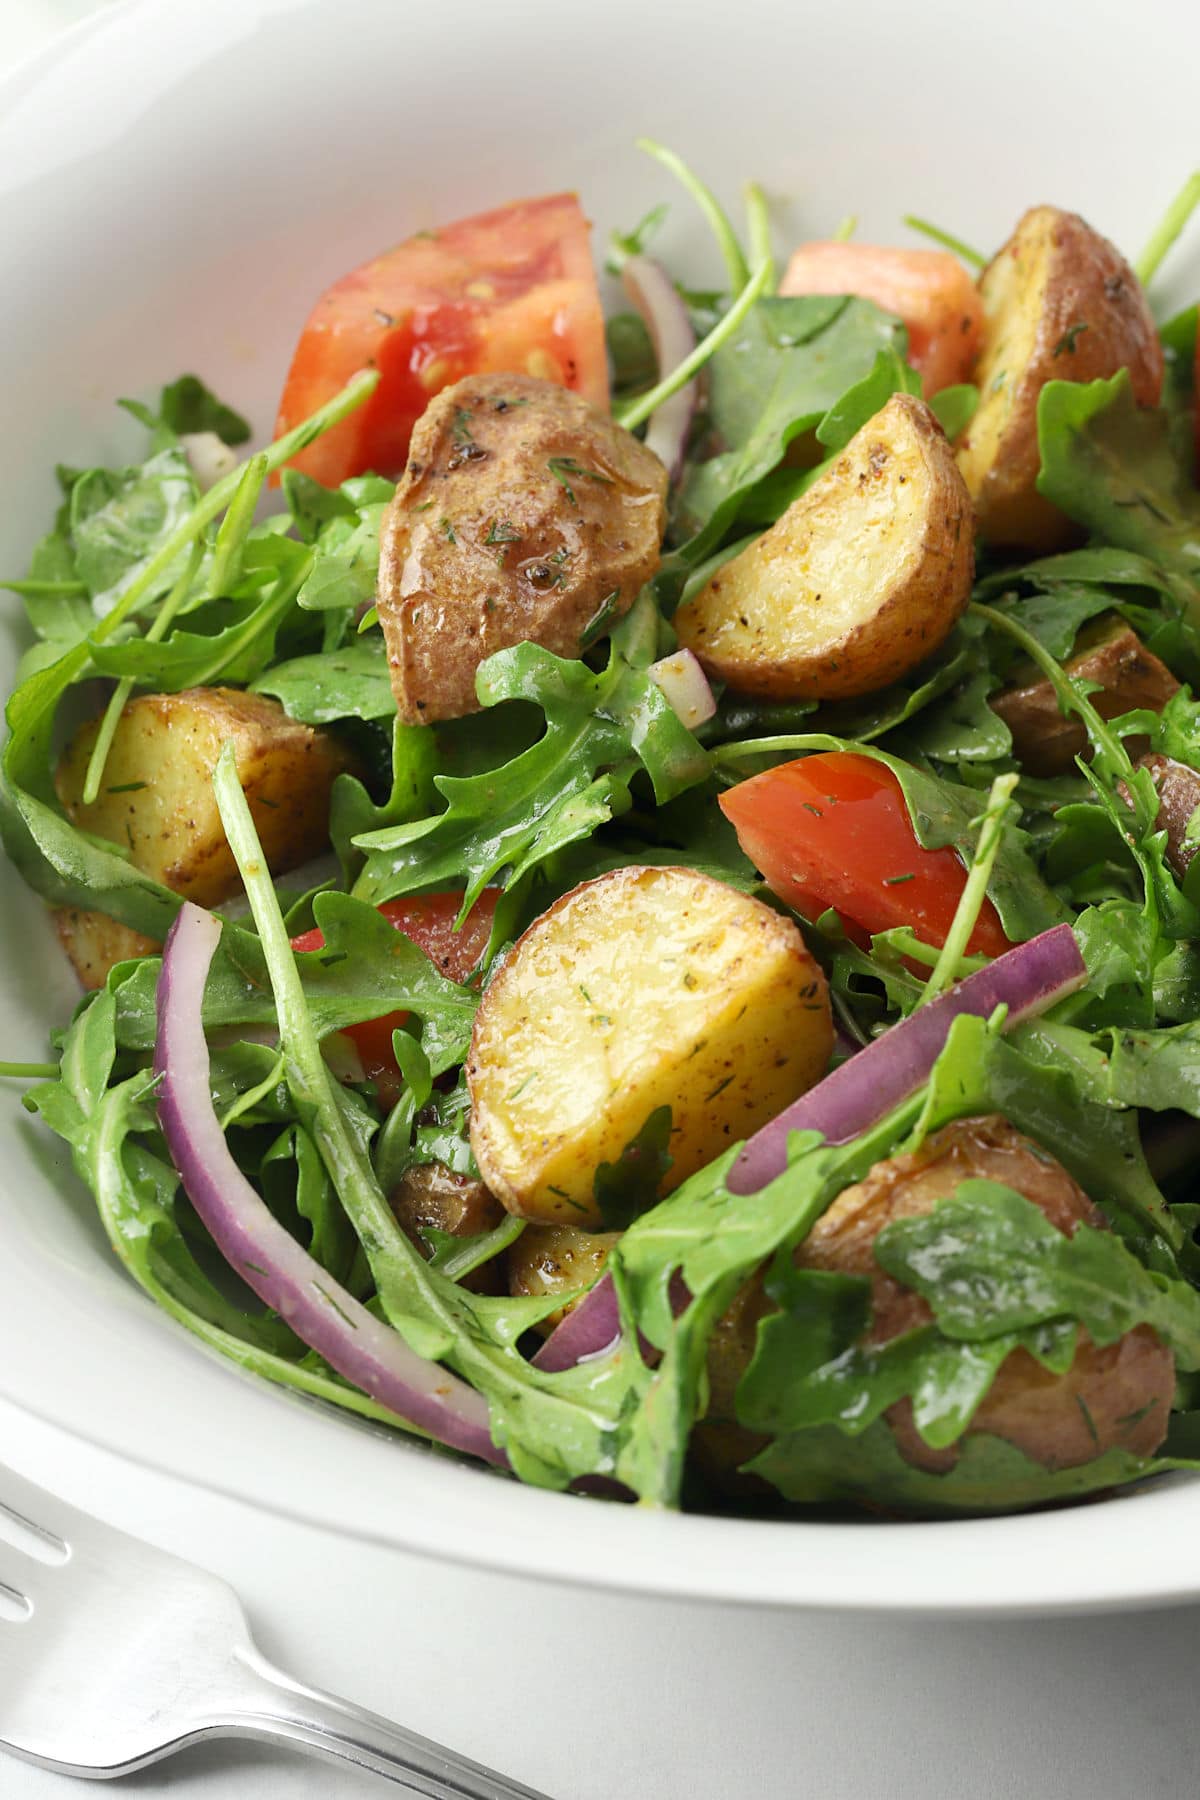 Roasted potatoes tossed in an arugula salad in a white bowl.